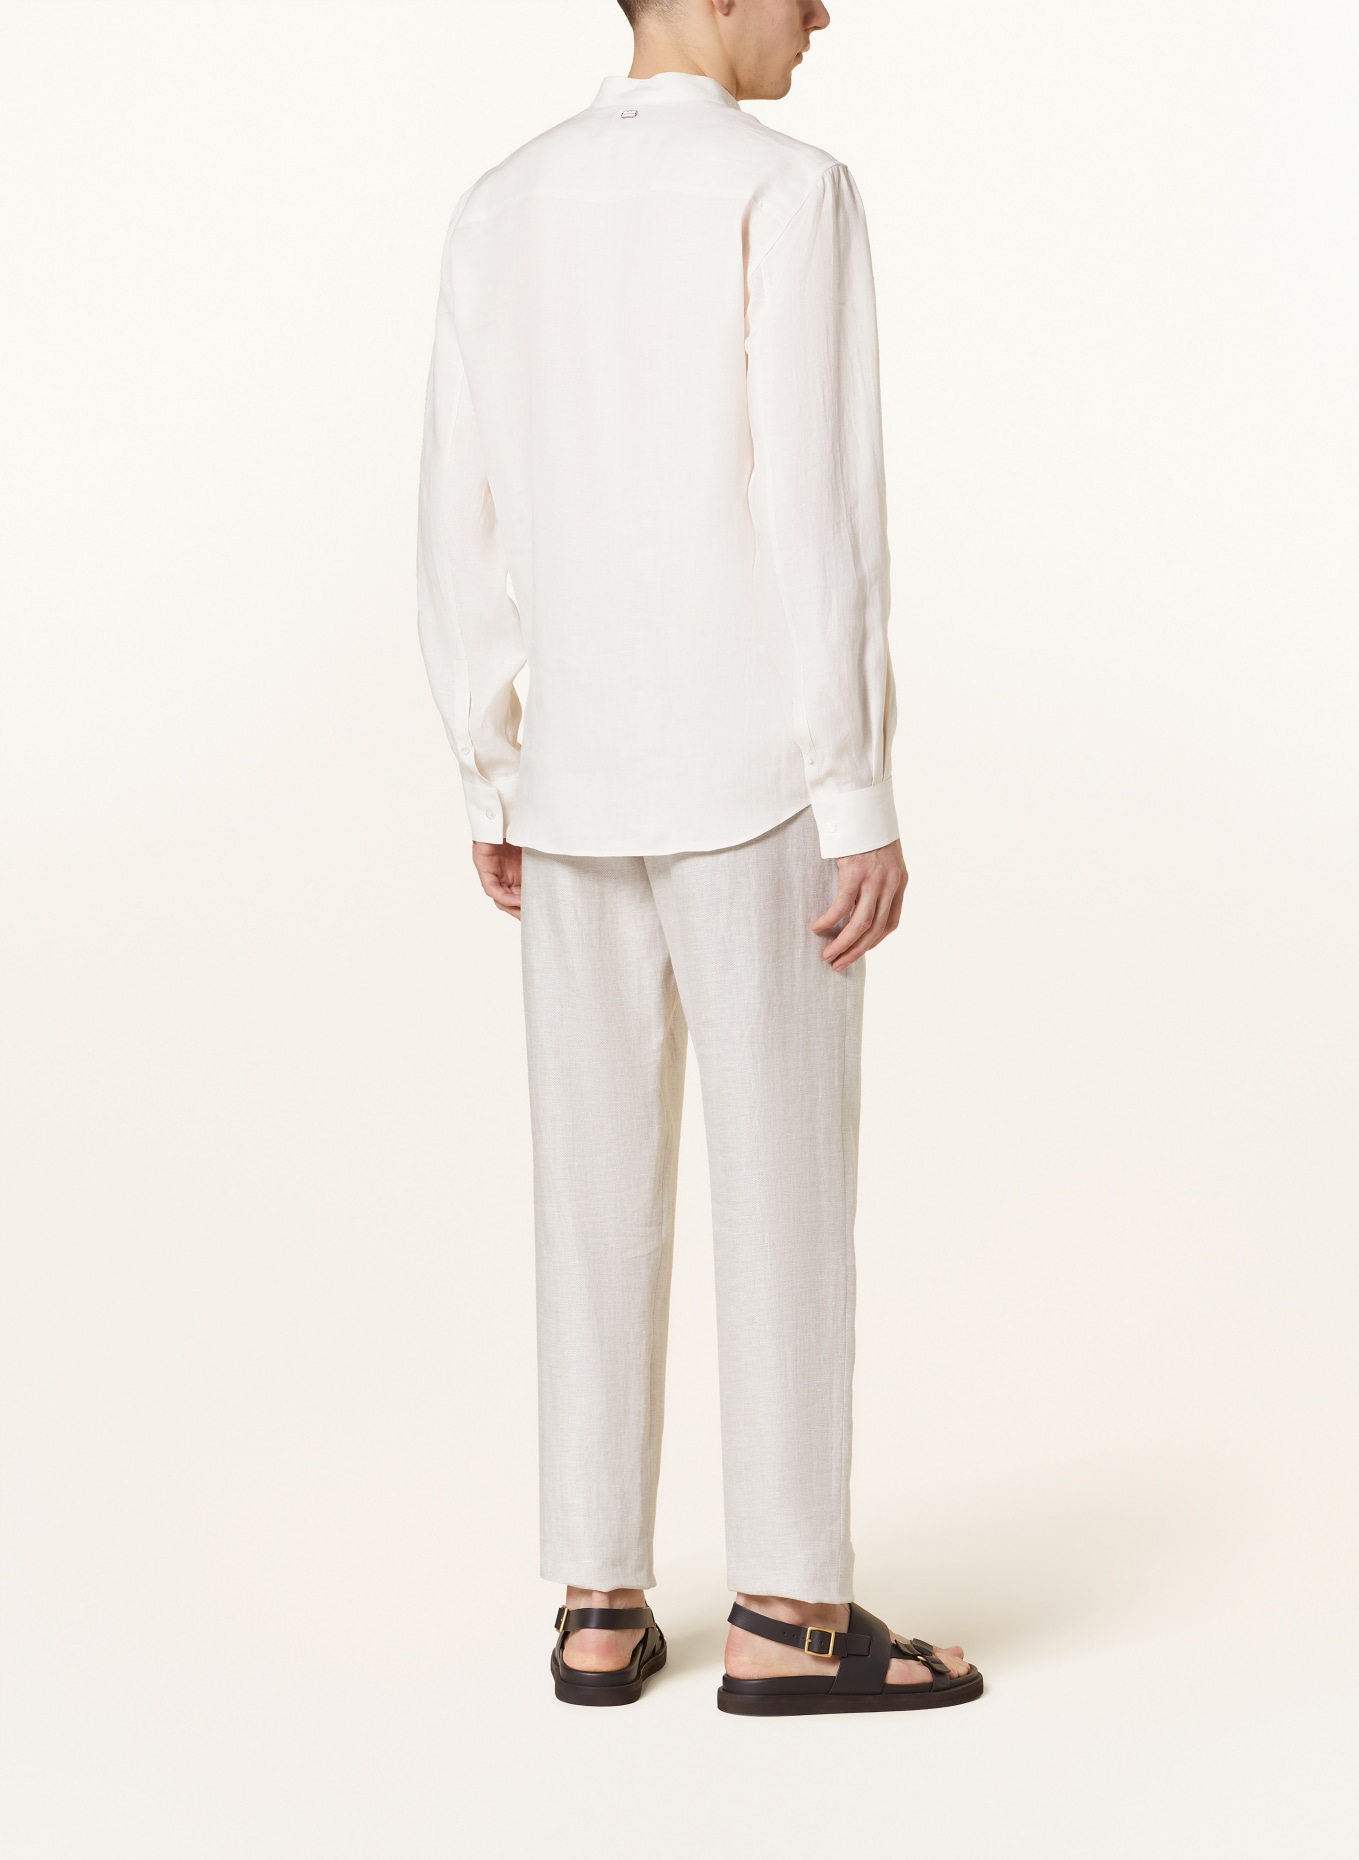 AGNONA Linen shirt regular fit with stand-up collar, Color: CREAM (Image 3)